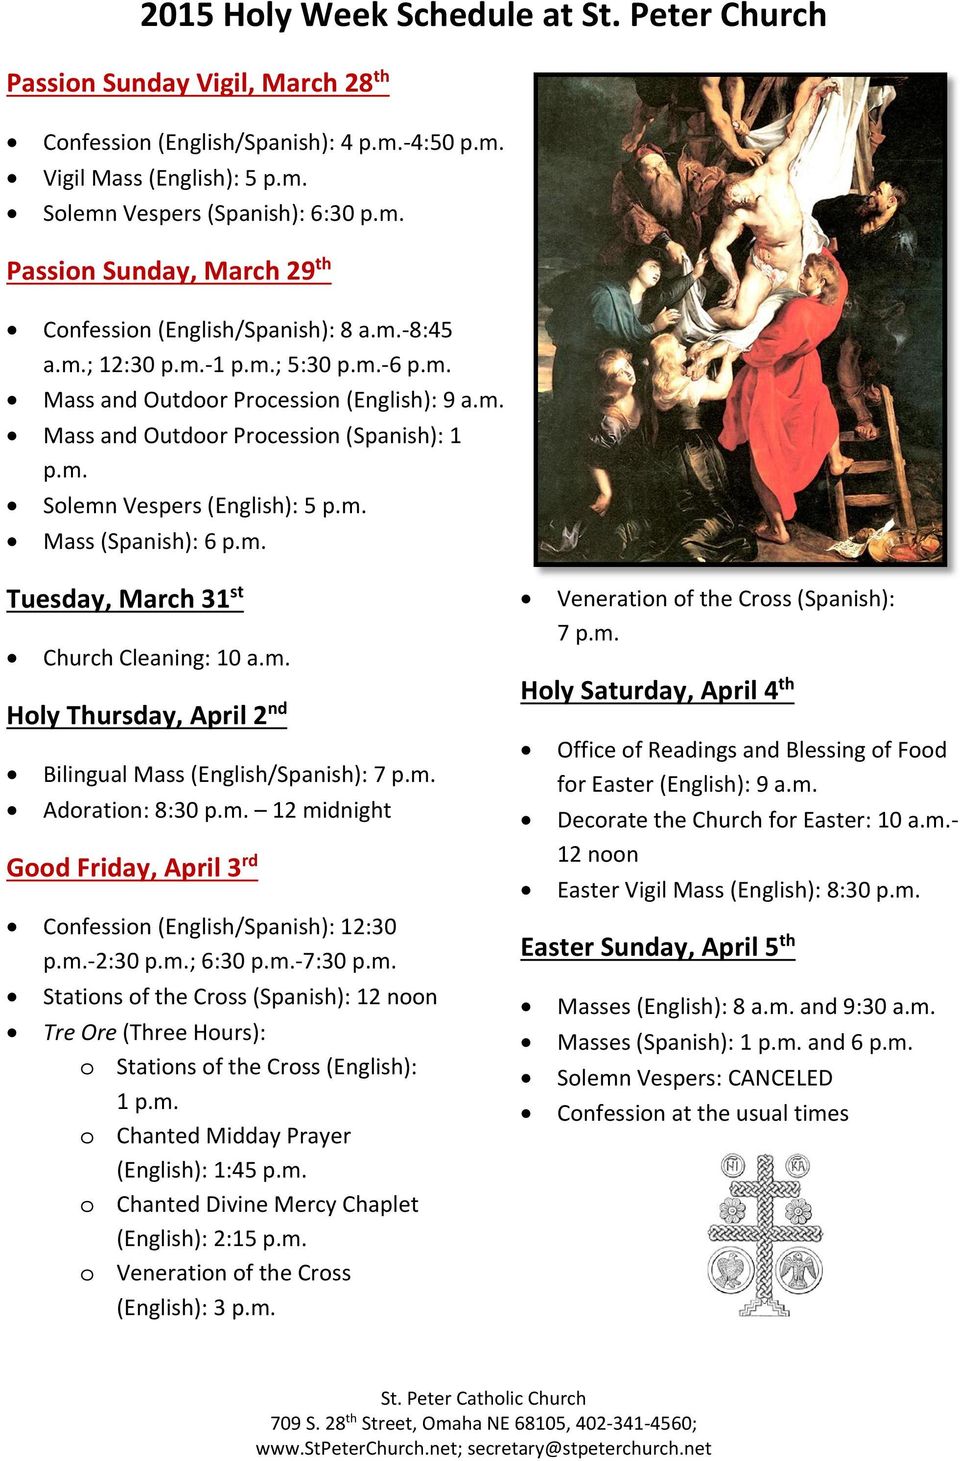 m. Holy Thursday, April 2 nd Bilingual Mass (English/Spanish): 7 p.m. Adoration: 8:30 p.m. 12 midnight Good Friday, April 3 rd Confession (English/Spanish): 12:30 p.m.-2:30 p.m.; 6:30 p.m.-7:30 p.m. Stations of the Cross (Spanish): 12 noon Tre Ore (Three Hours): o Stations of the Cross (English): 1 p.